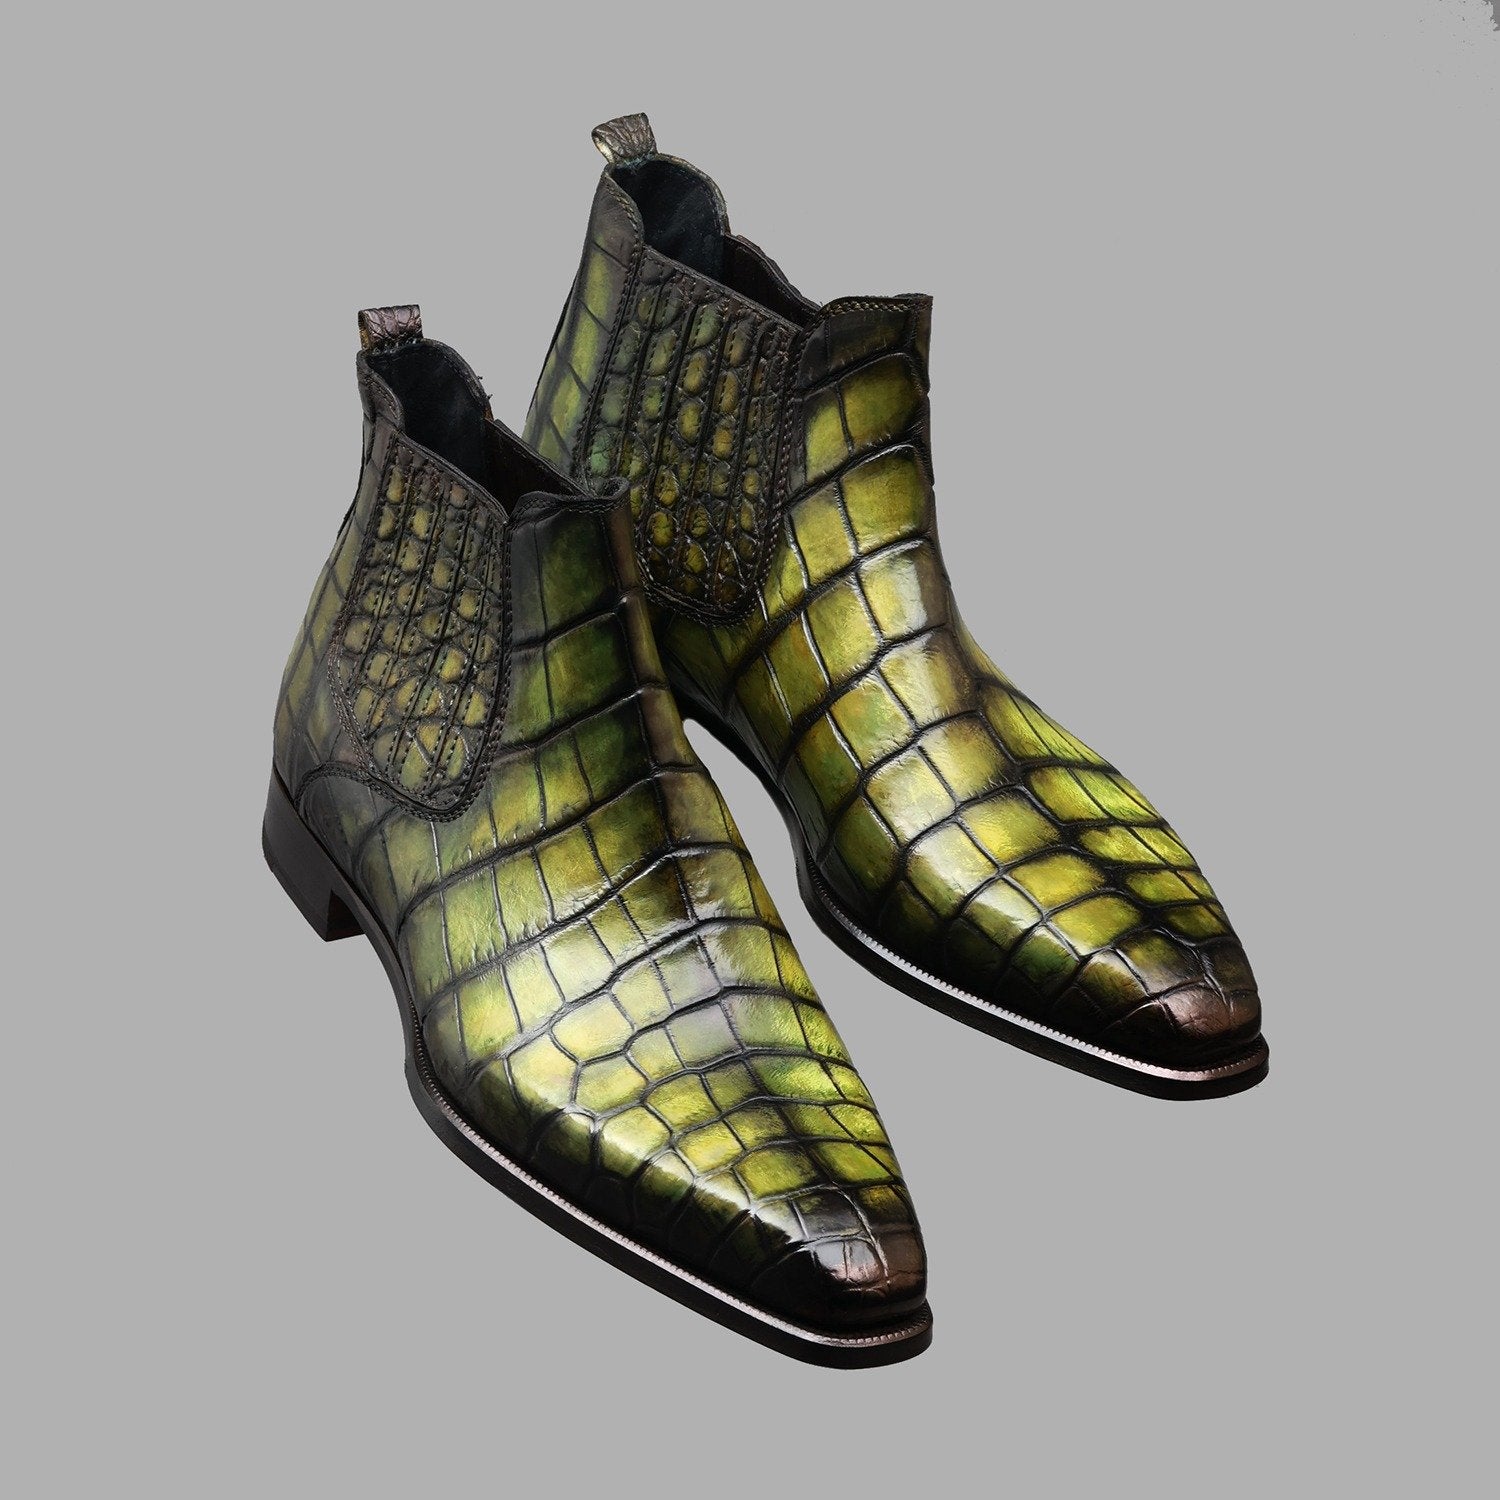 Ultimate Chelsea Boots, Toxic Green Color